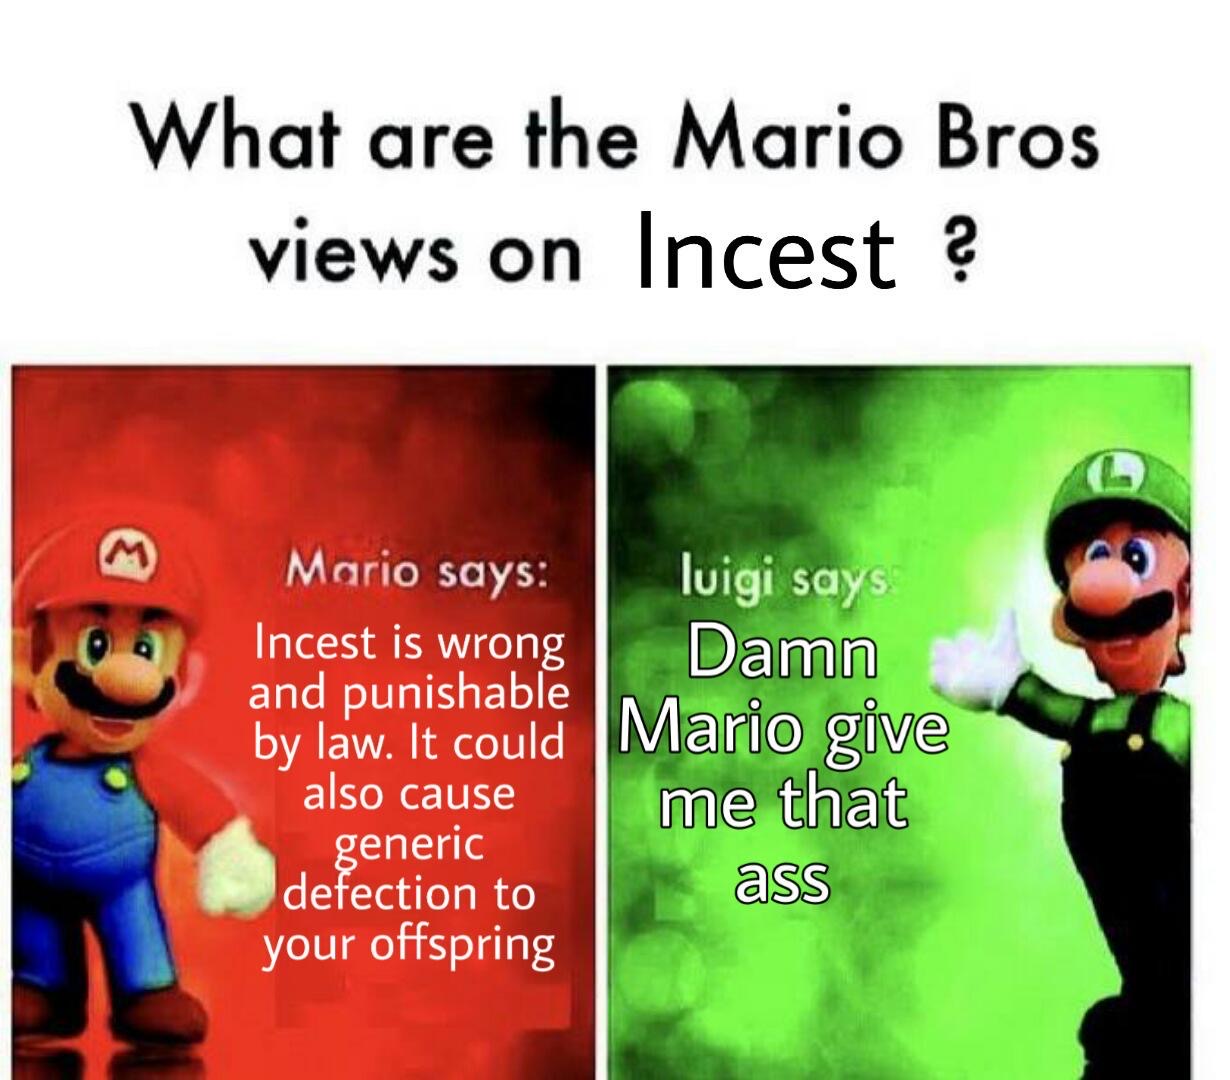 onee san memes - What are the Mario Bros views on Incest ? M Mario says Incest is wrong luigi says Damn also cause and punishable by law. It could Mario give me that generic defection to ass your offspring